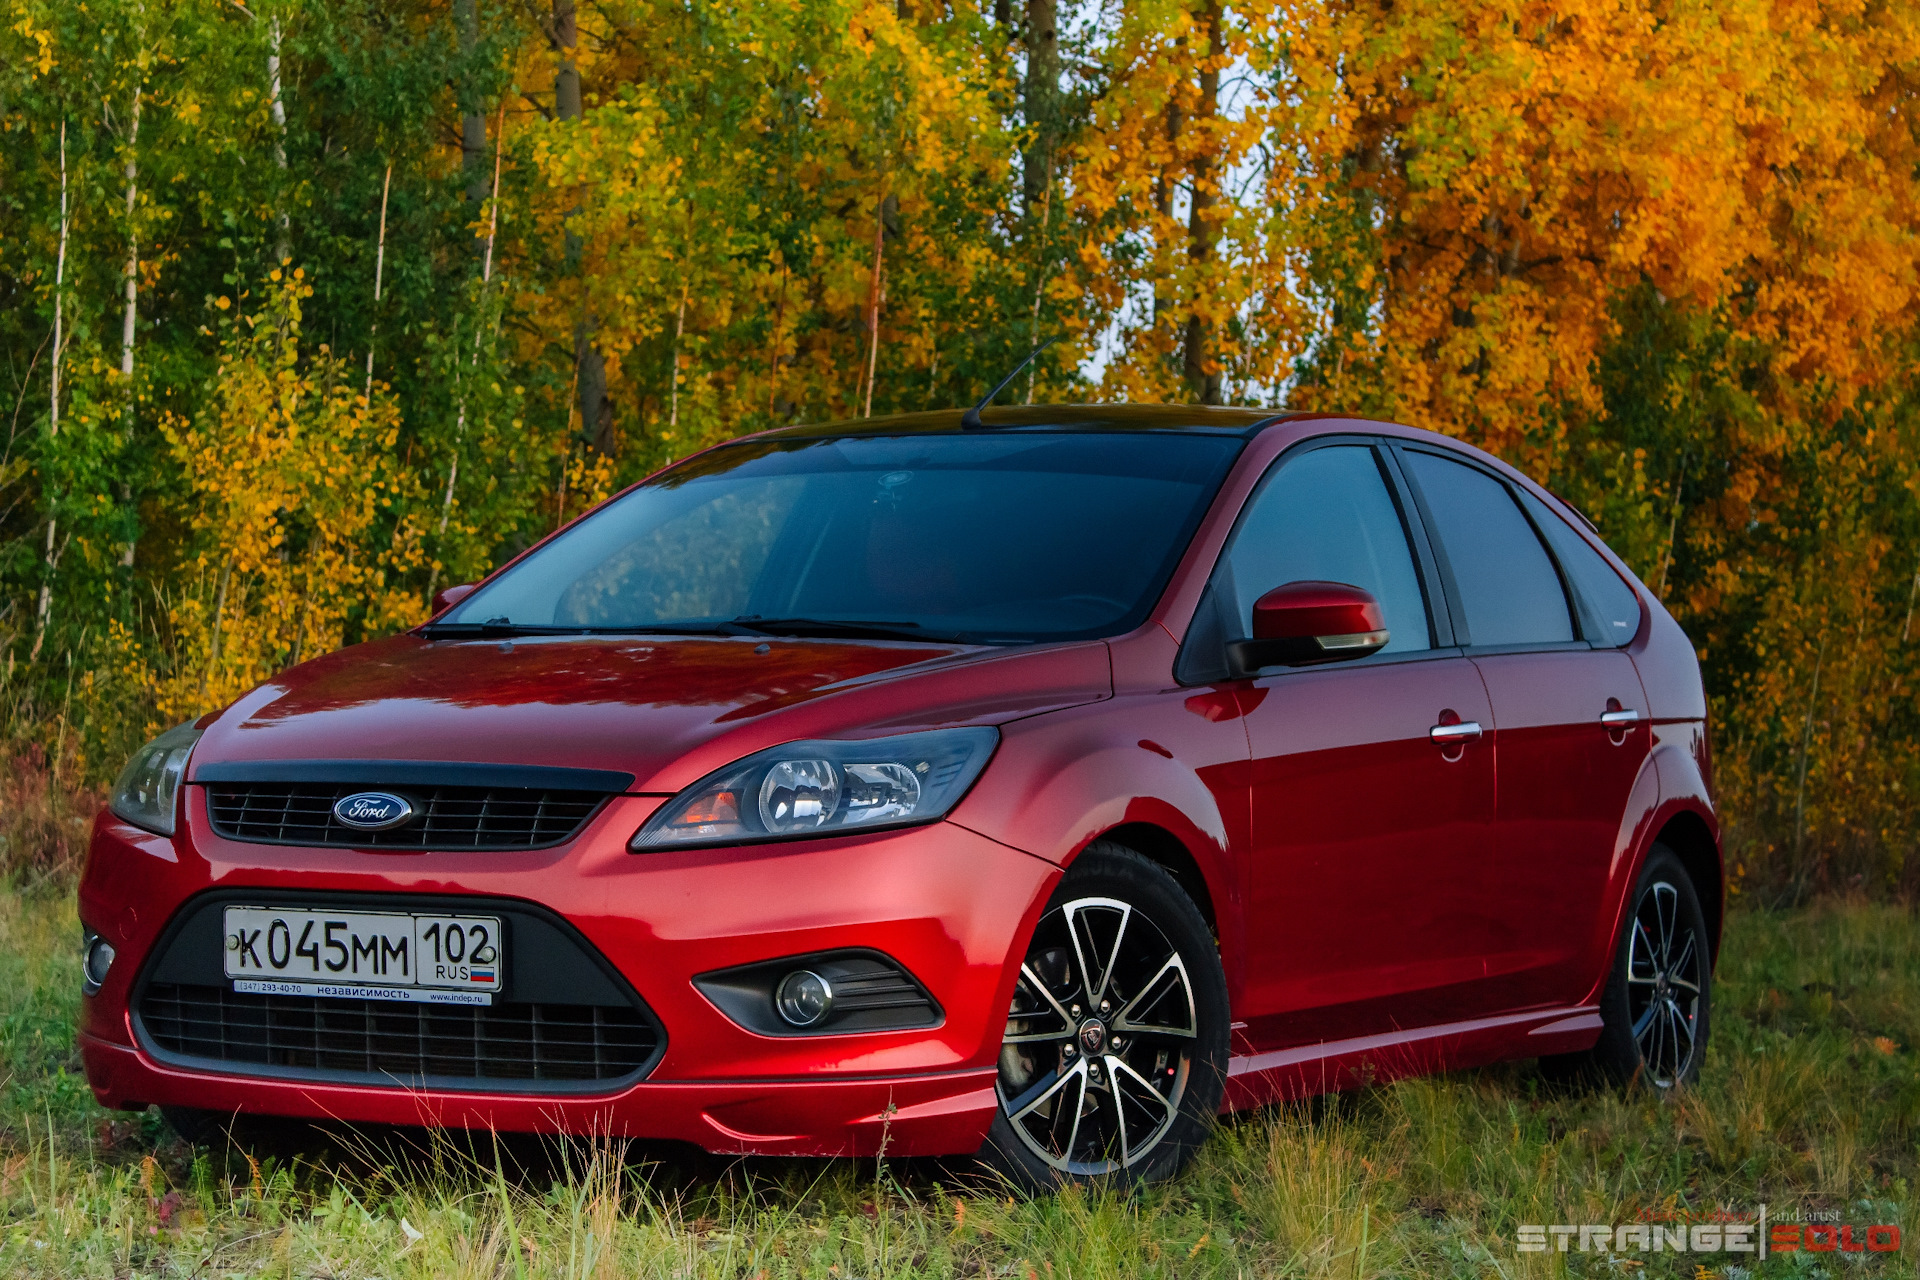 Ford focus цвет. Ford Focus 2 Рестайлинг. Ford Fokes 2 рест. Ford Focus 2 хэтчбек. Ford Focus 2 Restyling.